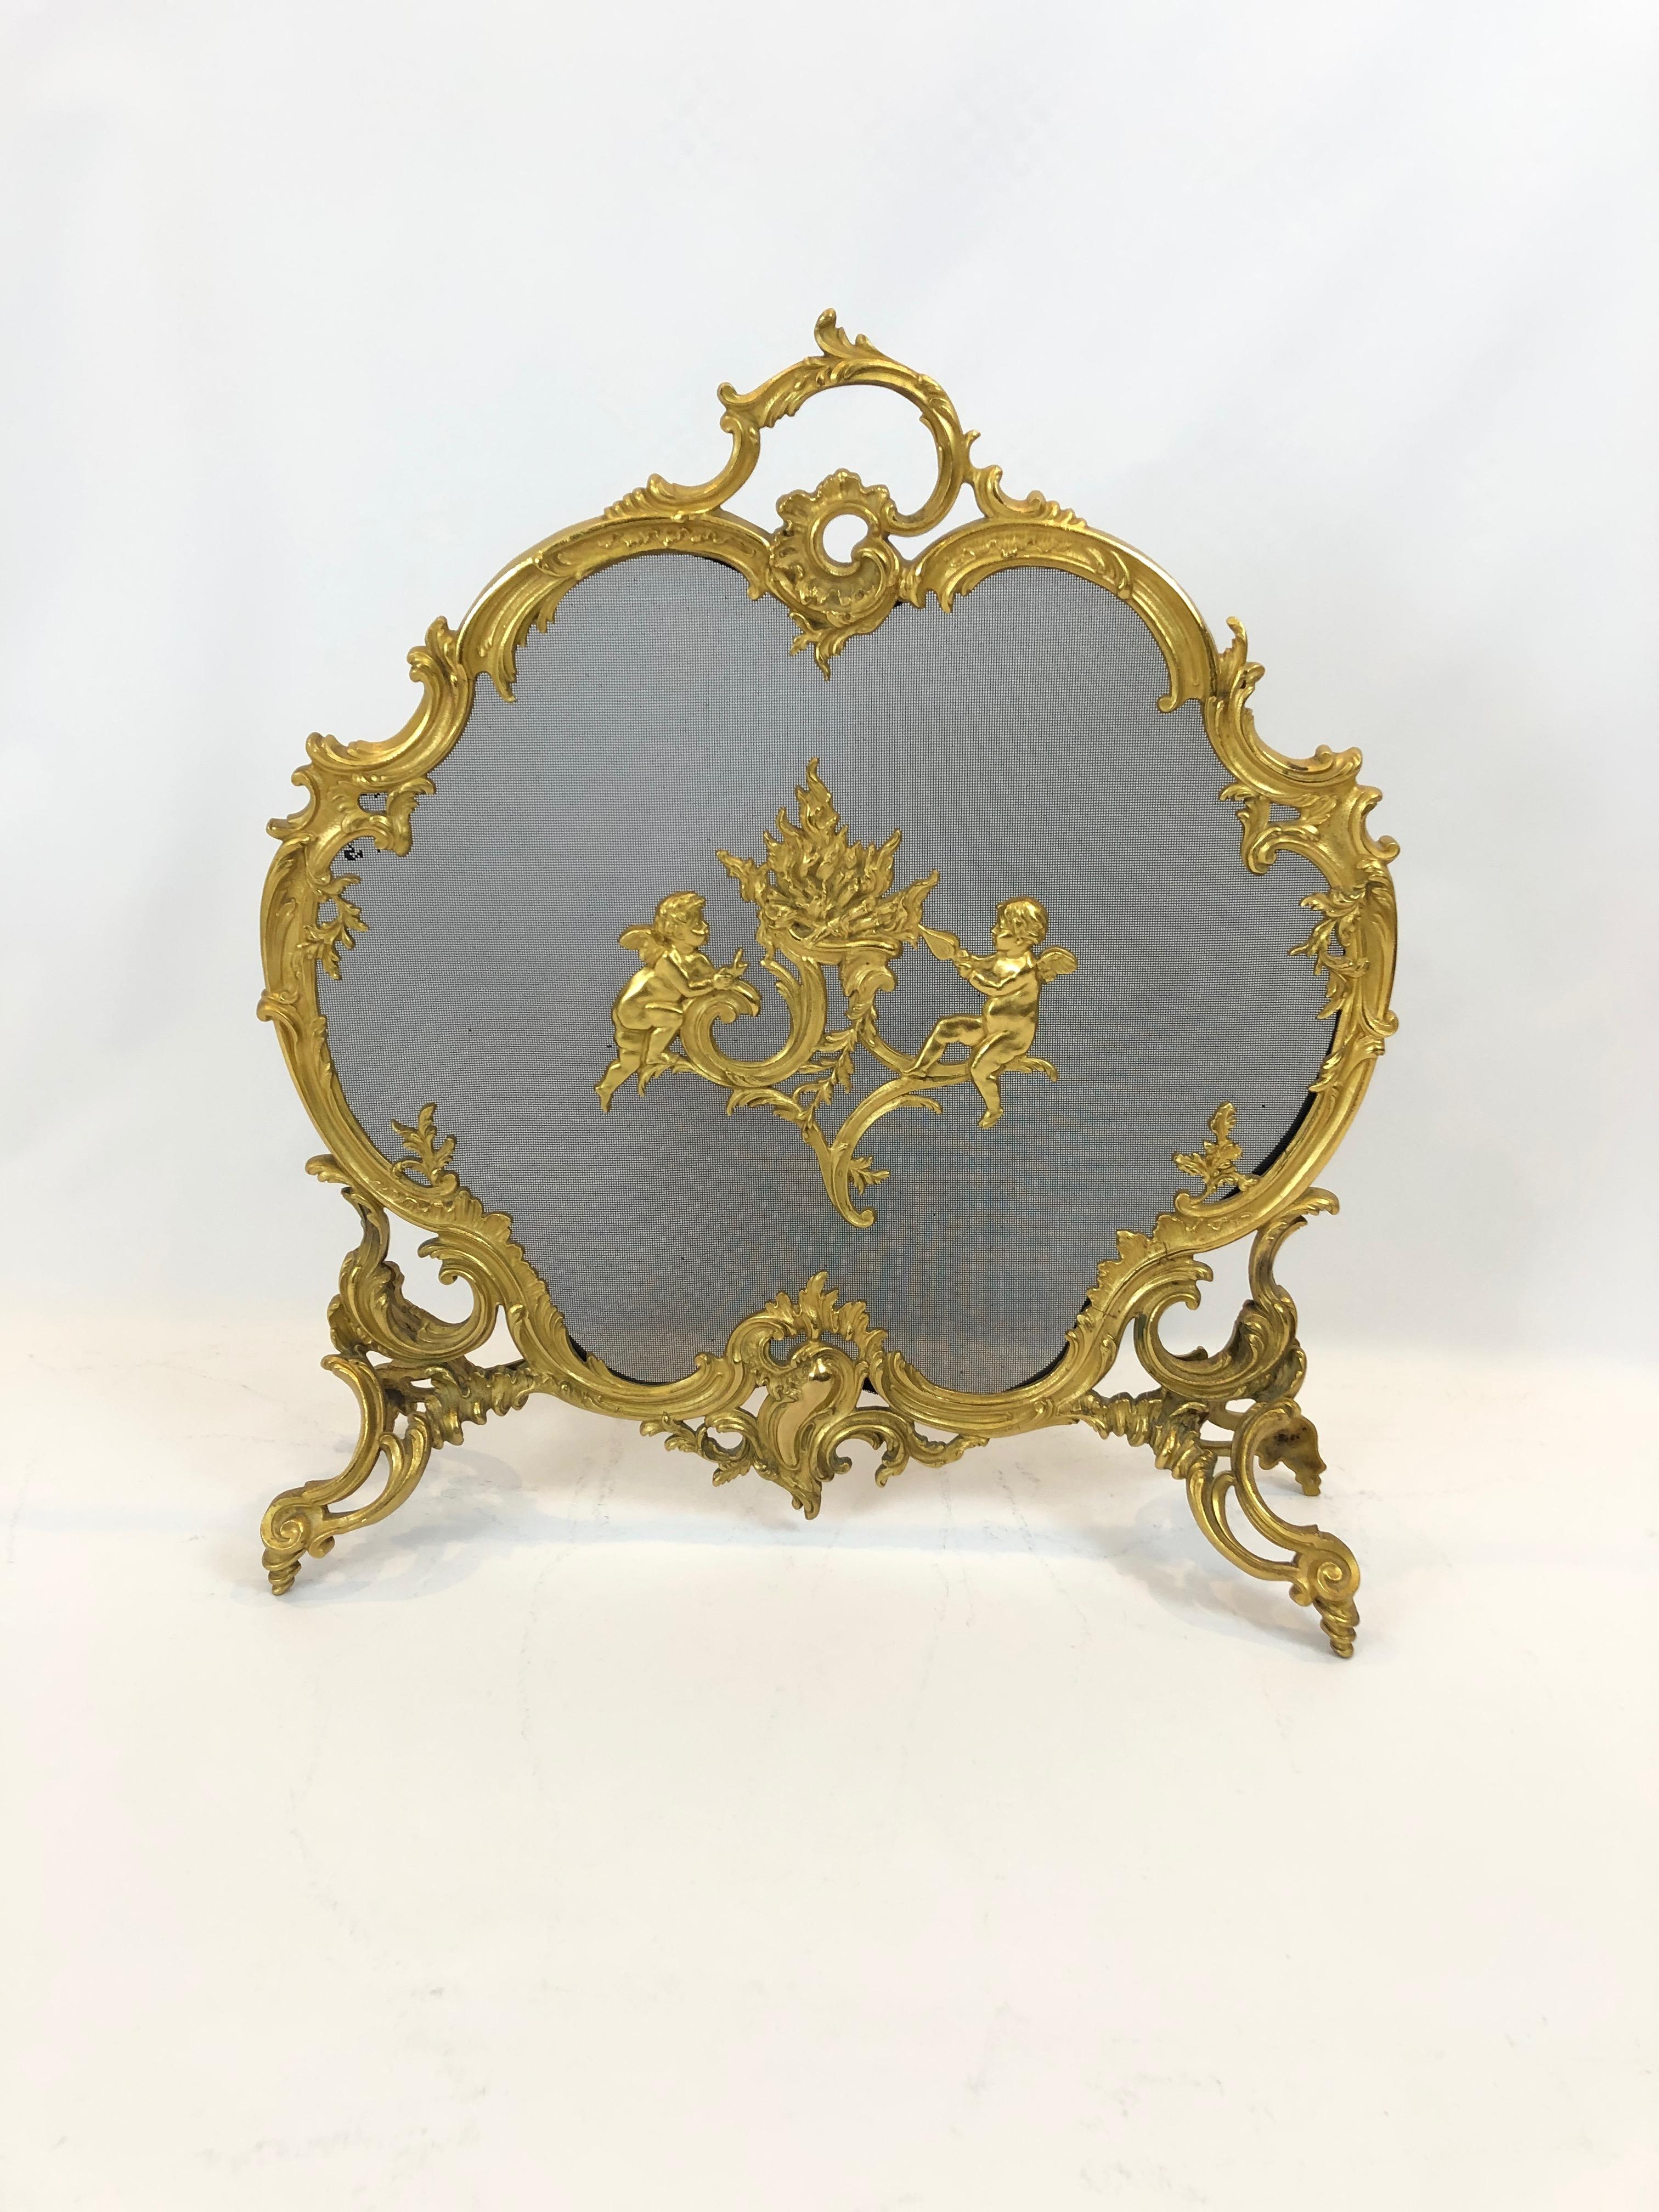 A superbly pretty sculptural fireplace screen having a scalloped rounded bronze dore frame in fancy French style, central pair of cherubs on the front of the screen and ornate feet.